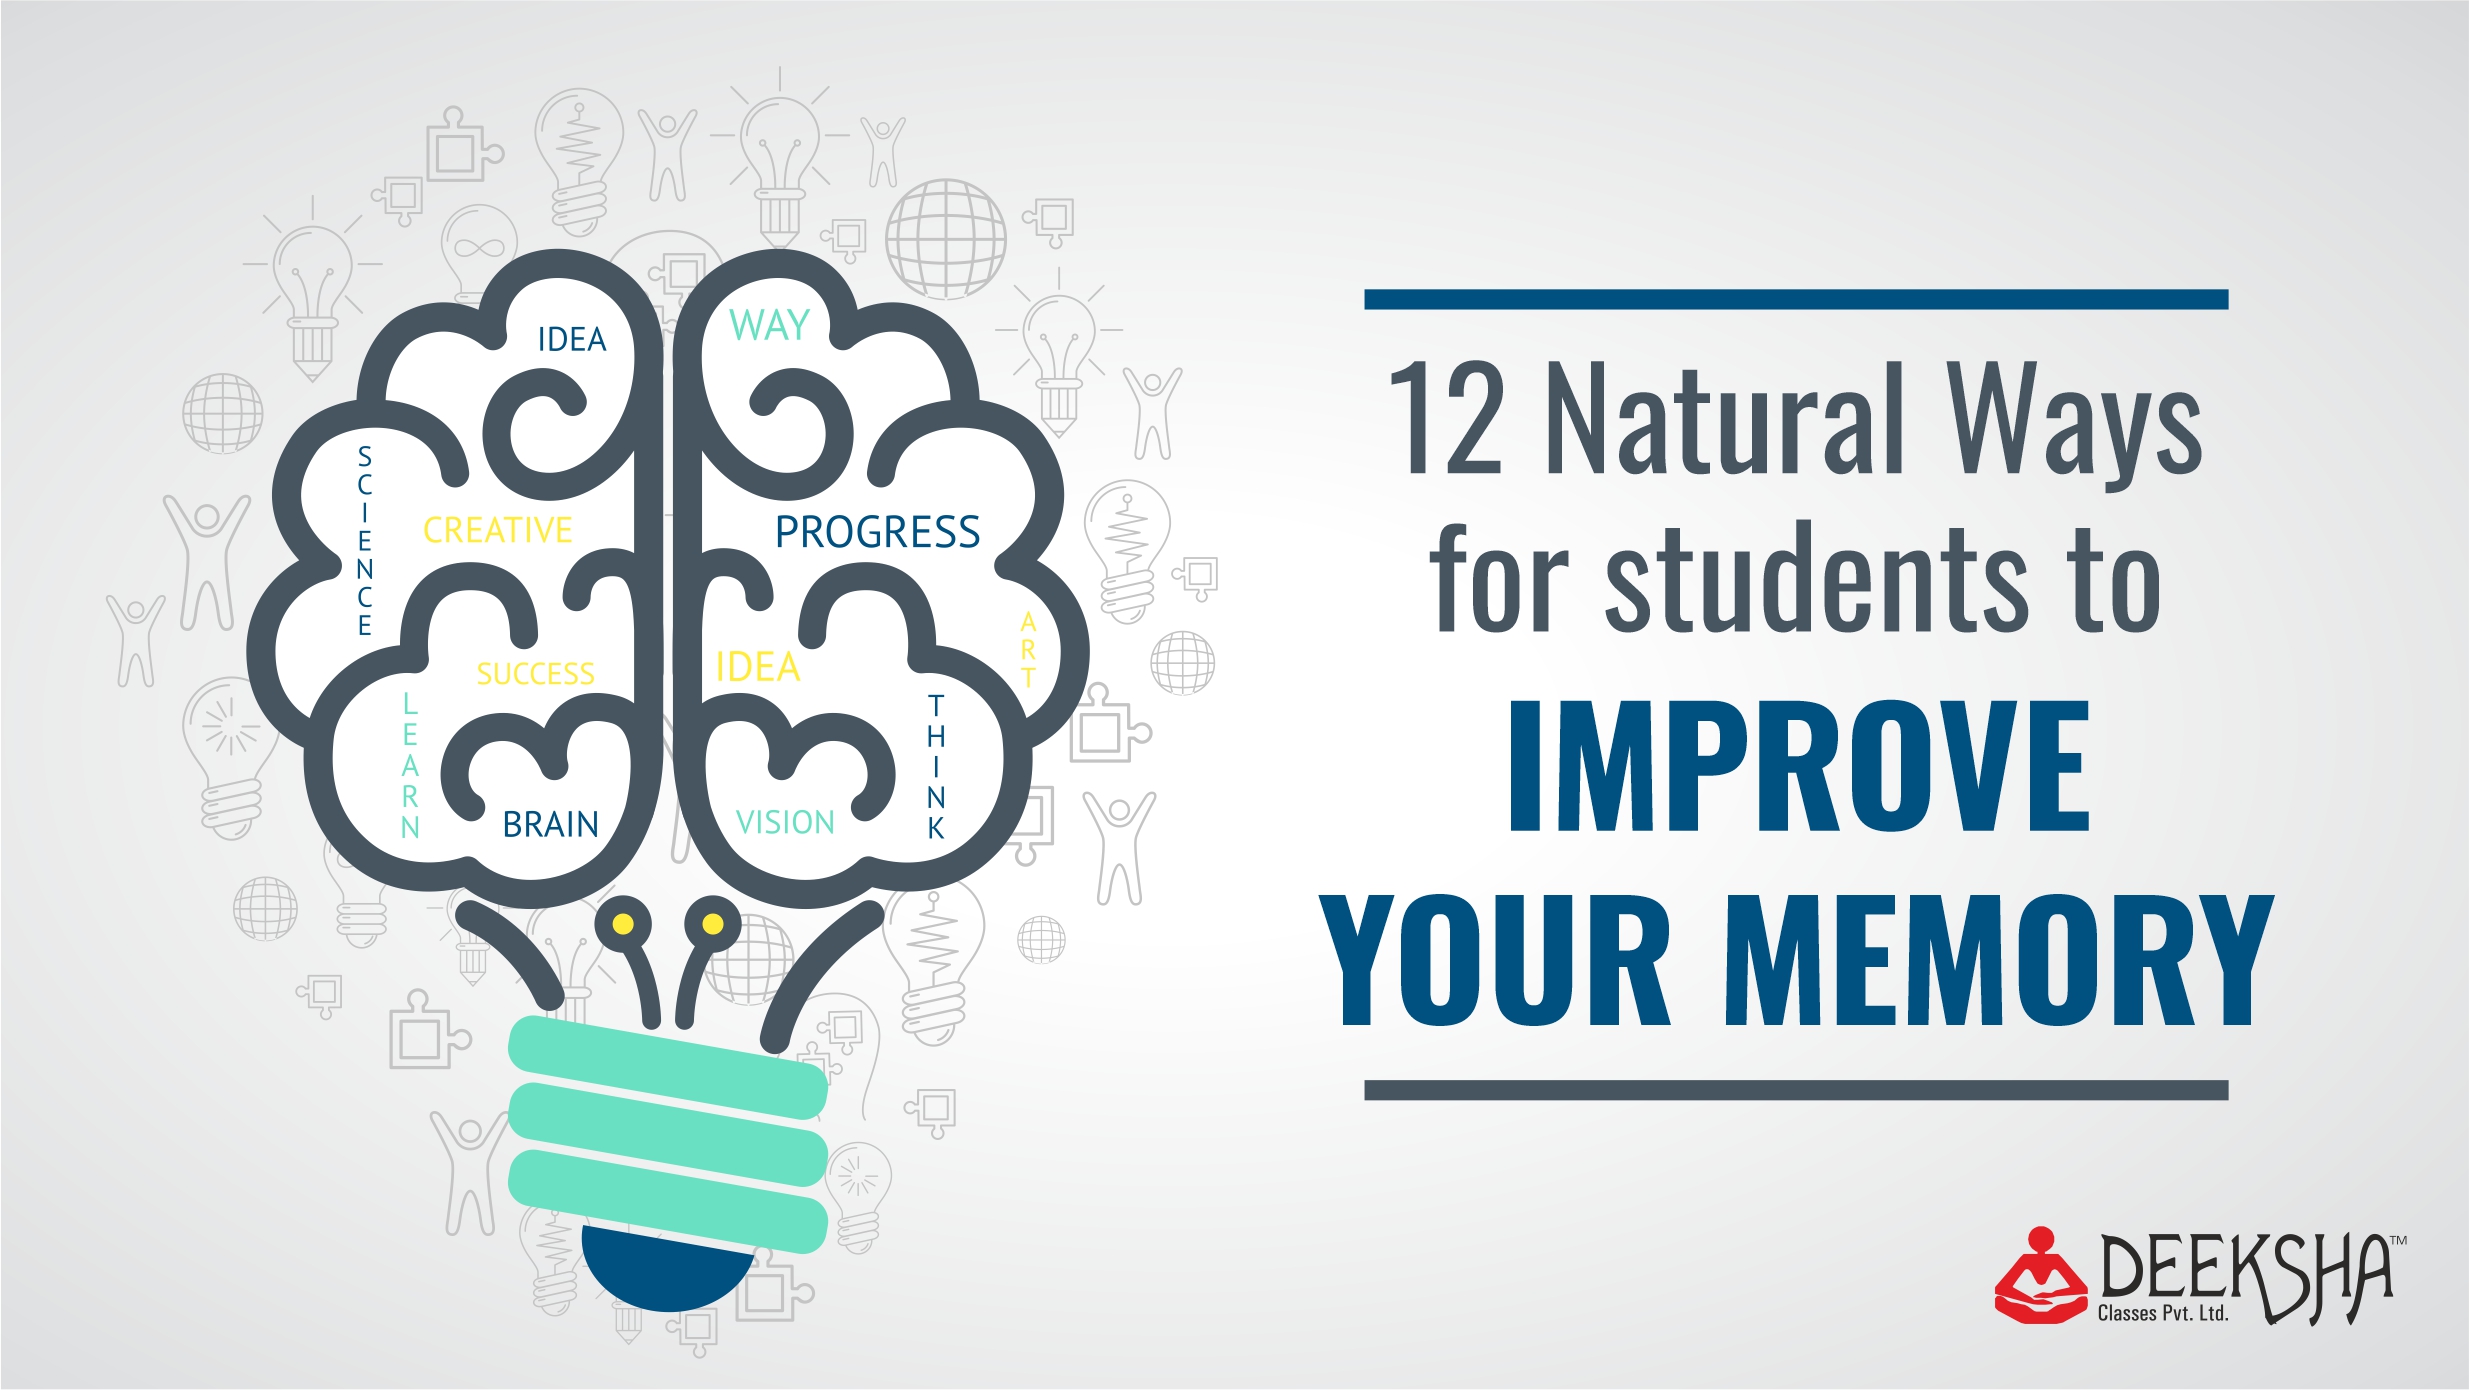 12 Natural Ways for students to Improve Your Memory